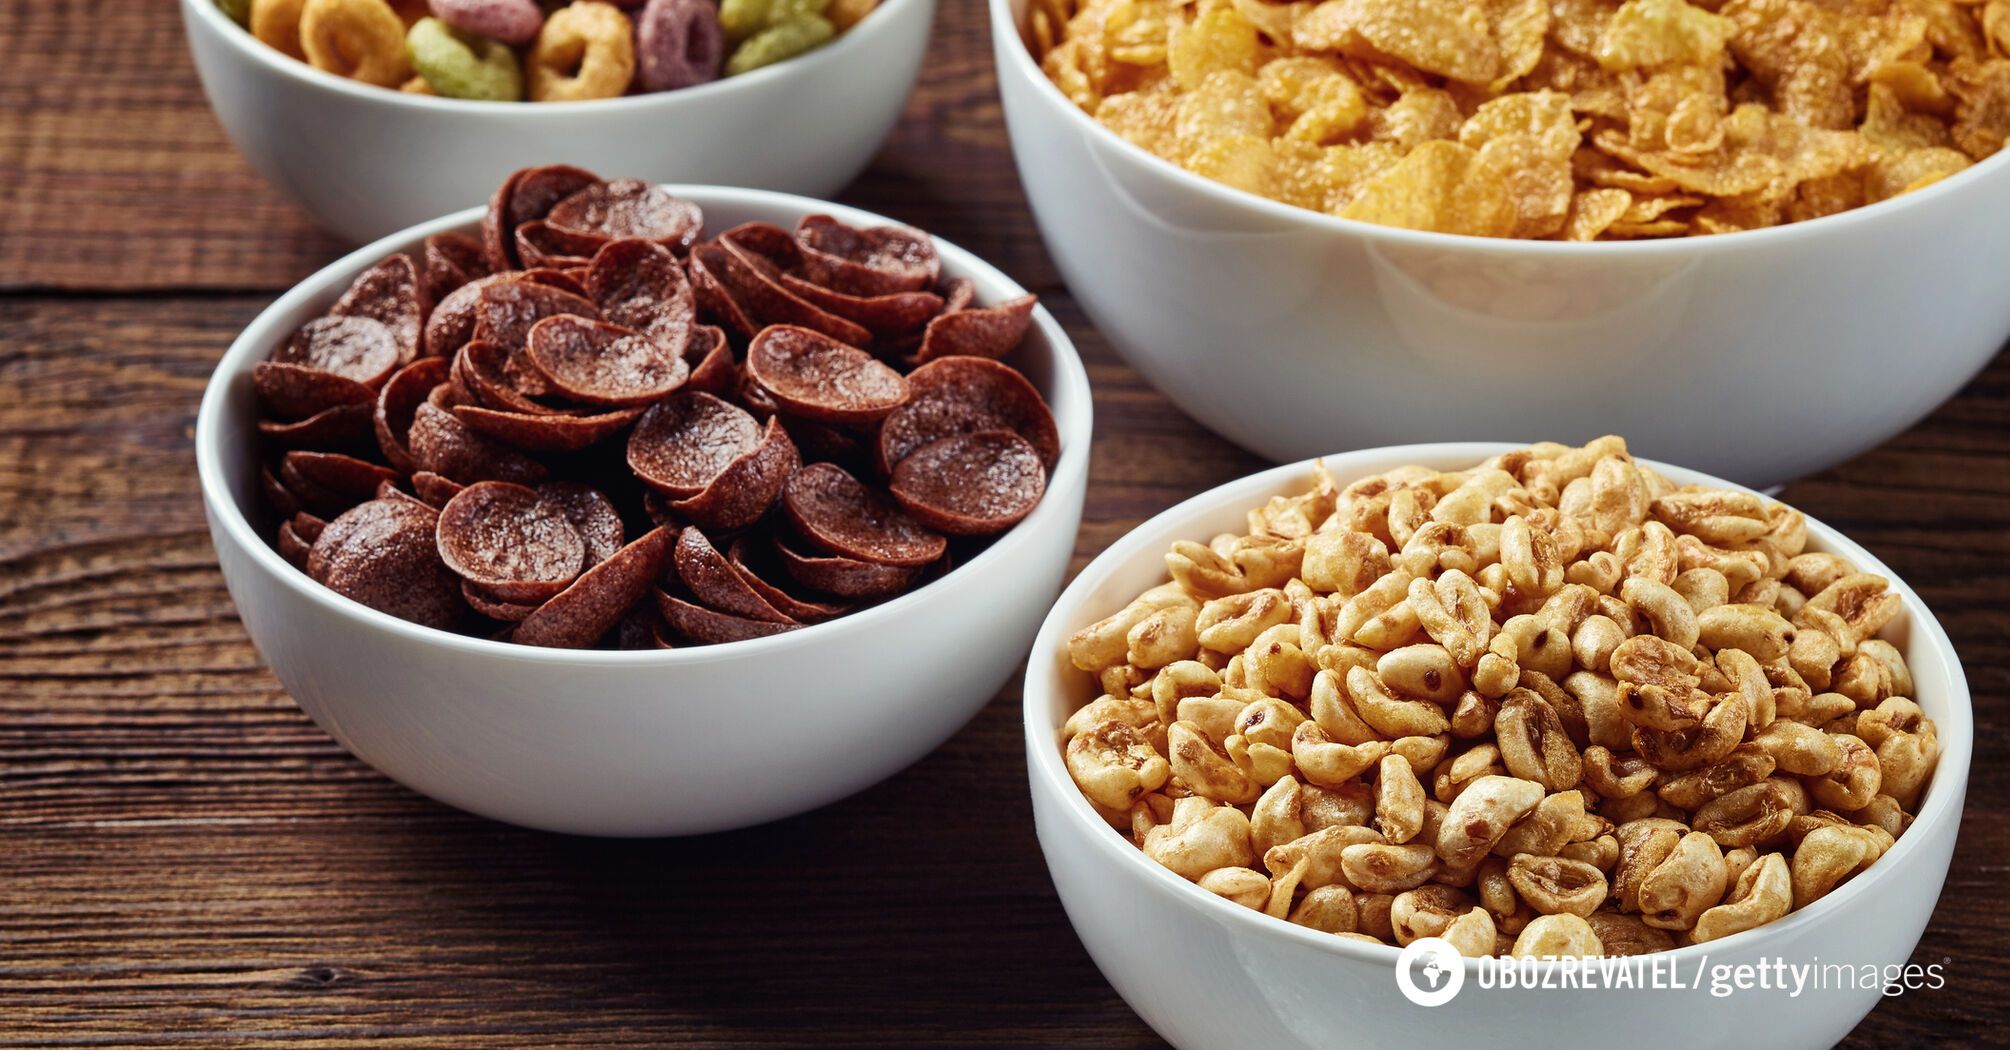 It is better to choose breakfast cereals with the least amount of sugar